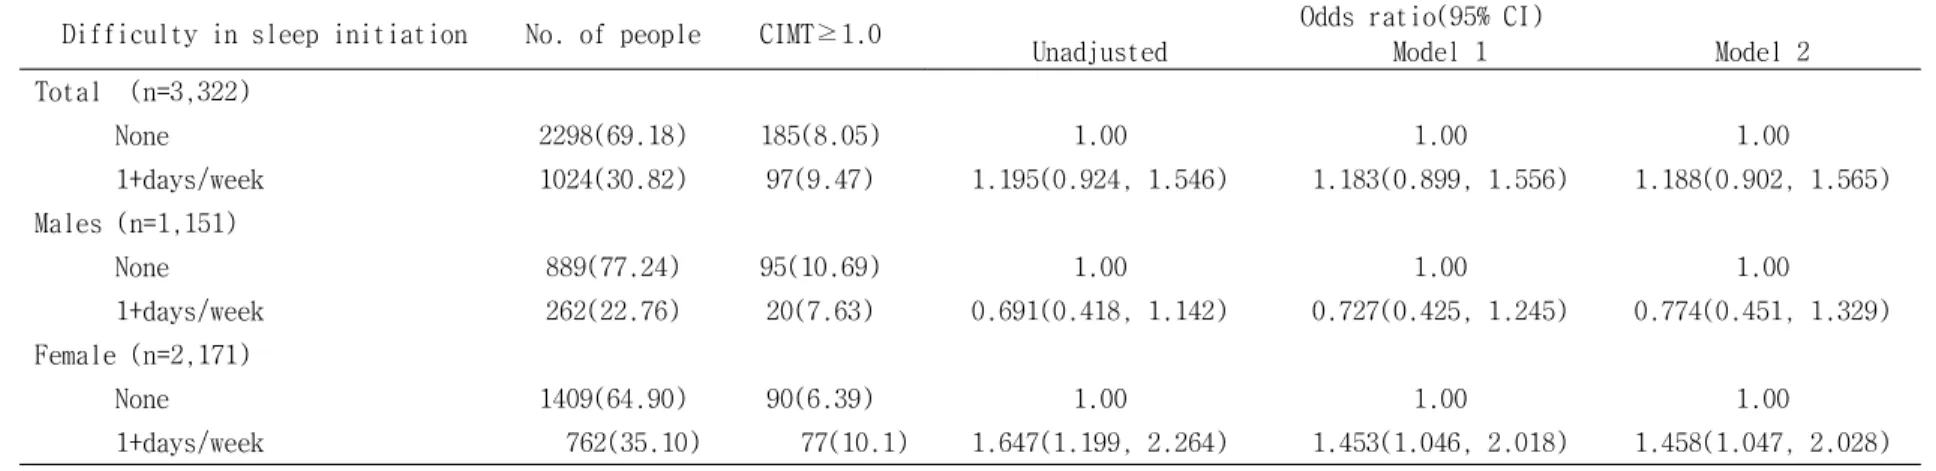 Table 5. Association between difficulty in sleep initiation and CIMT thickening